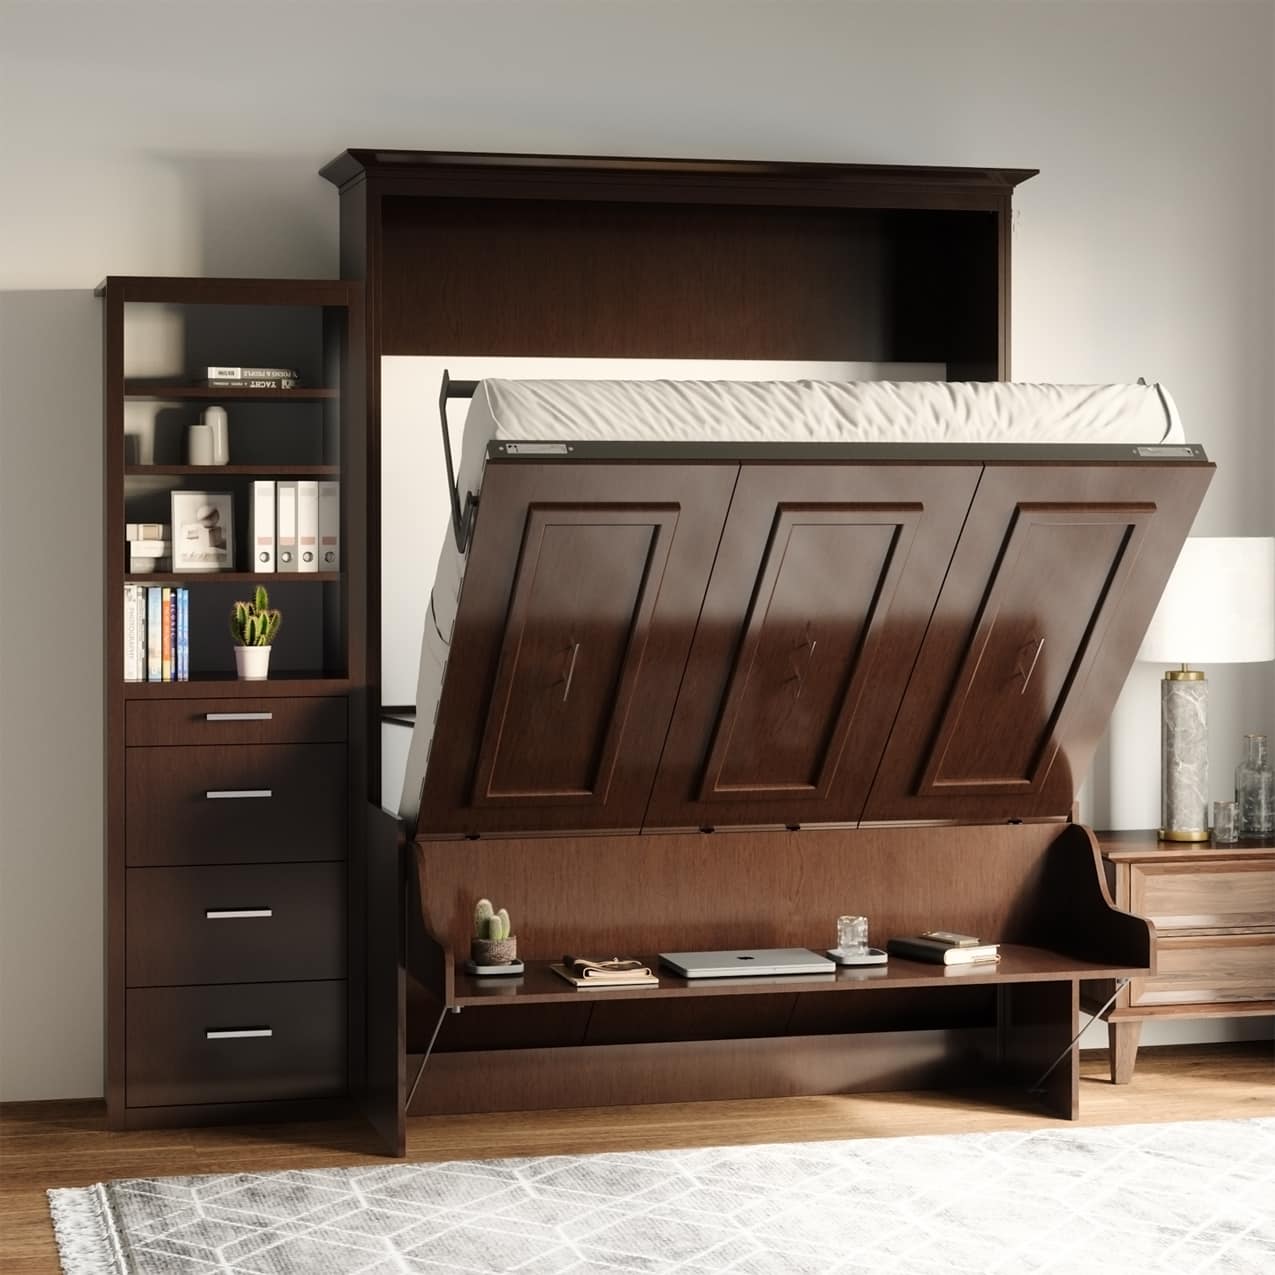 Coventry queen murphy bed with desk and 1 storage cabinet bed open to 45 degrees and desk staying level hidden hideaway hide away hide-a-way diy murphy bed kit fold out pull down wall bed cabinet desk bed combo home office guest bed